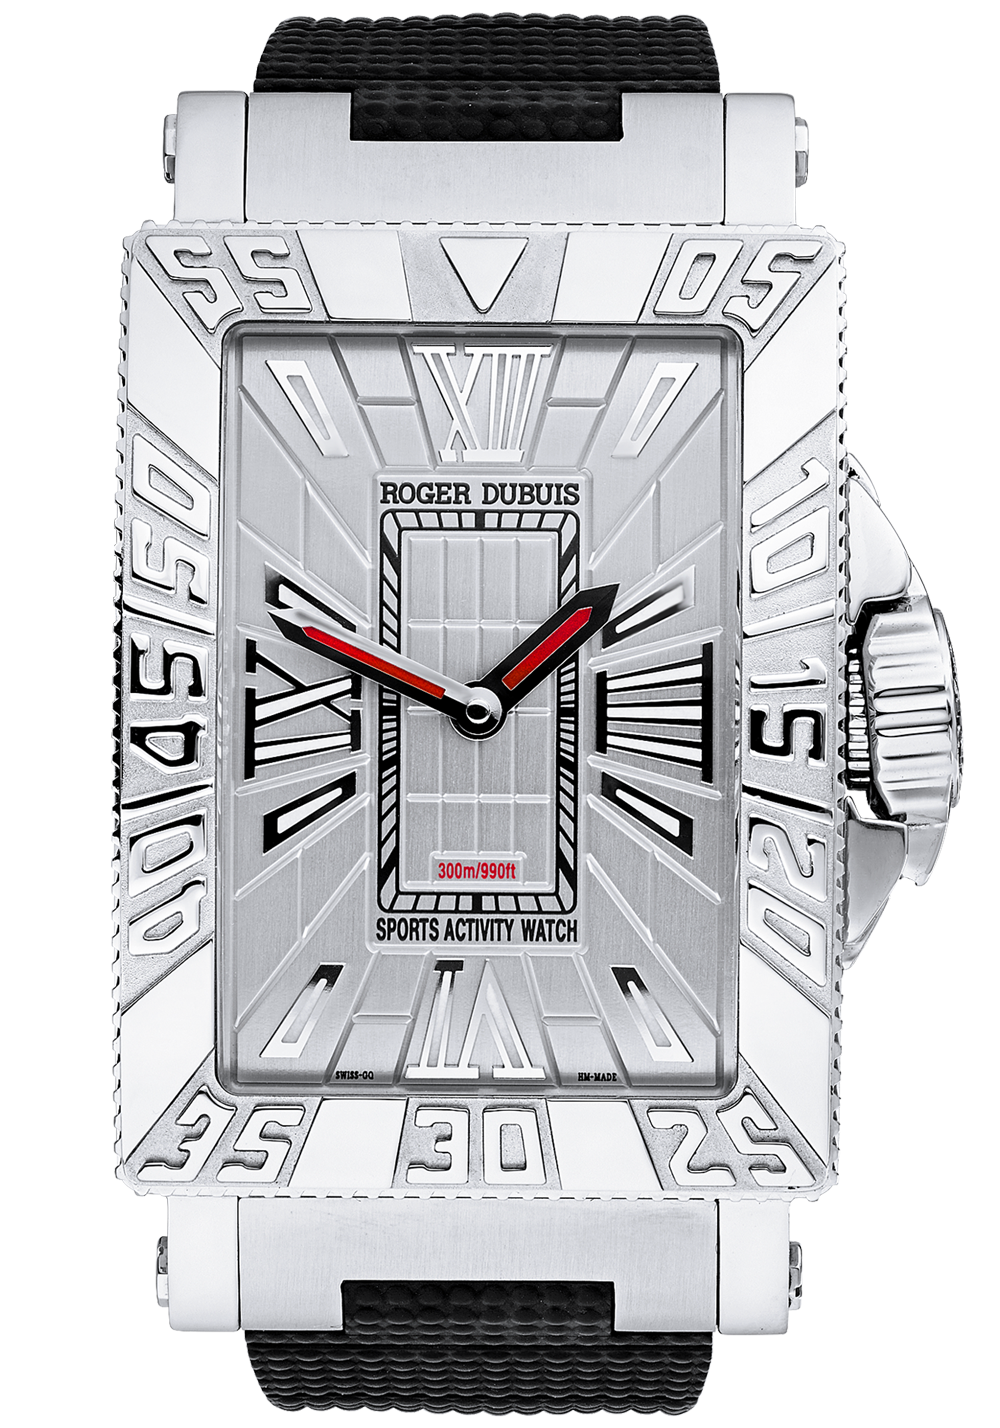 Roger Dubuis Roger Dubuis Sea More Just For Friends MS34 21 9 MS34 21 9